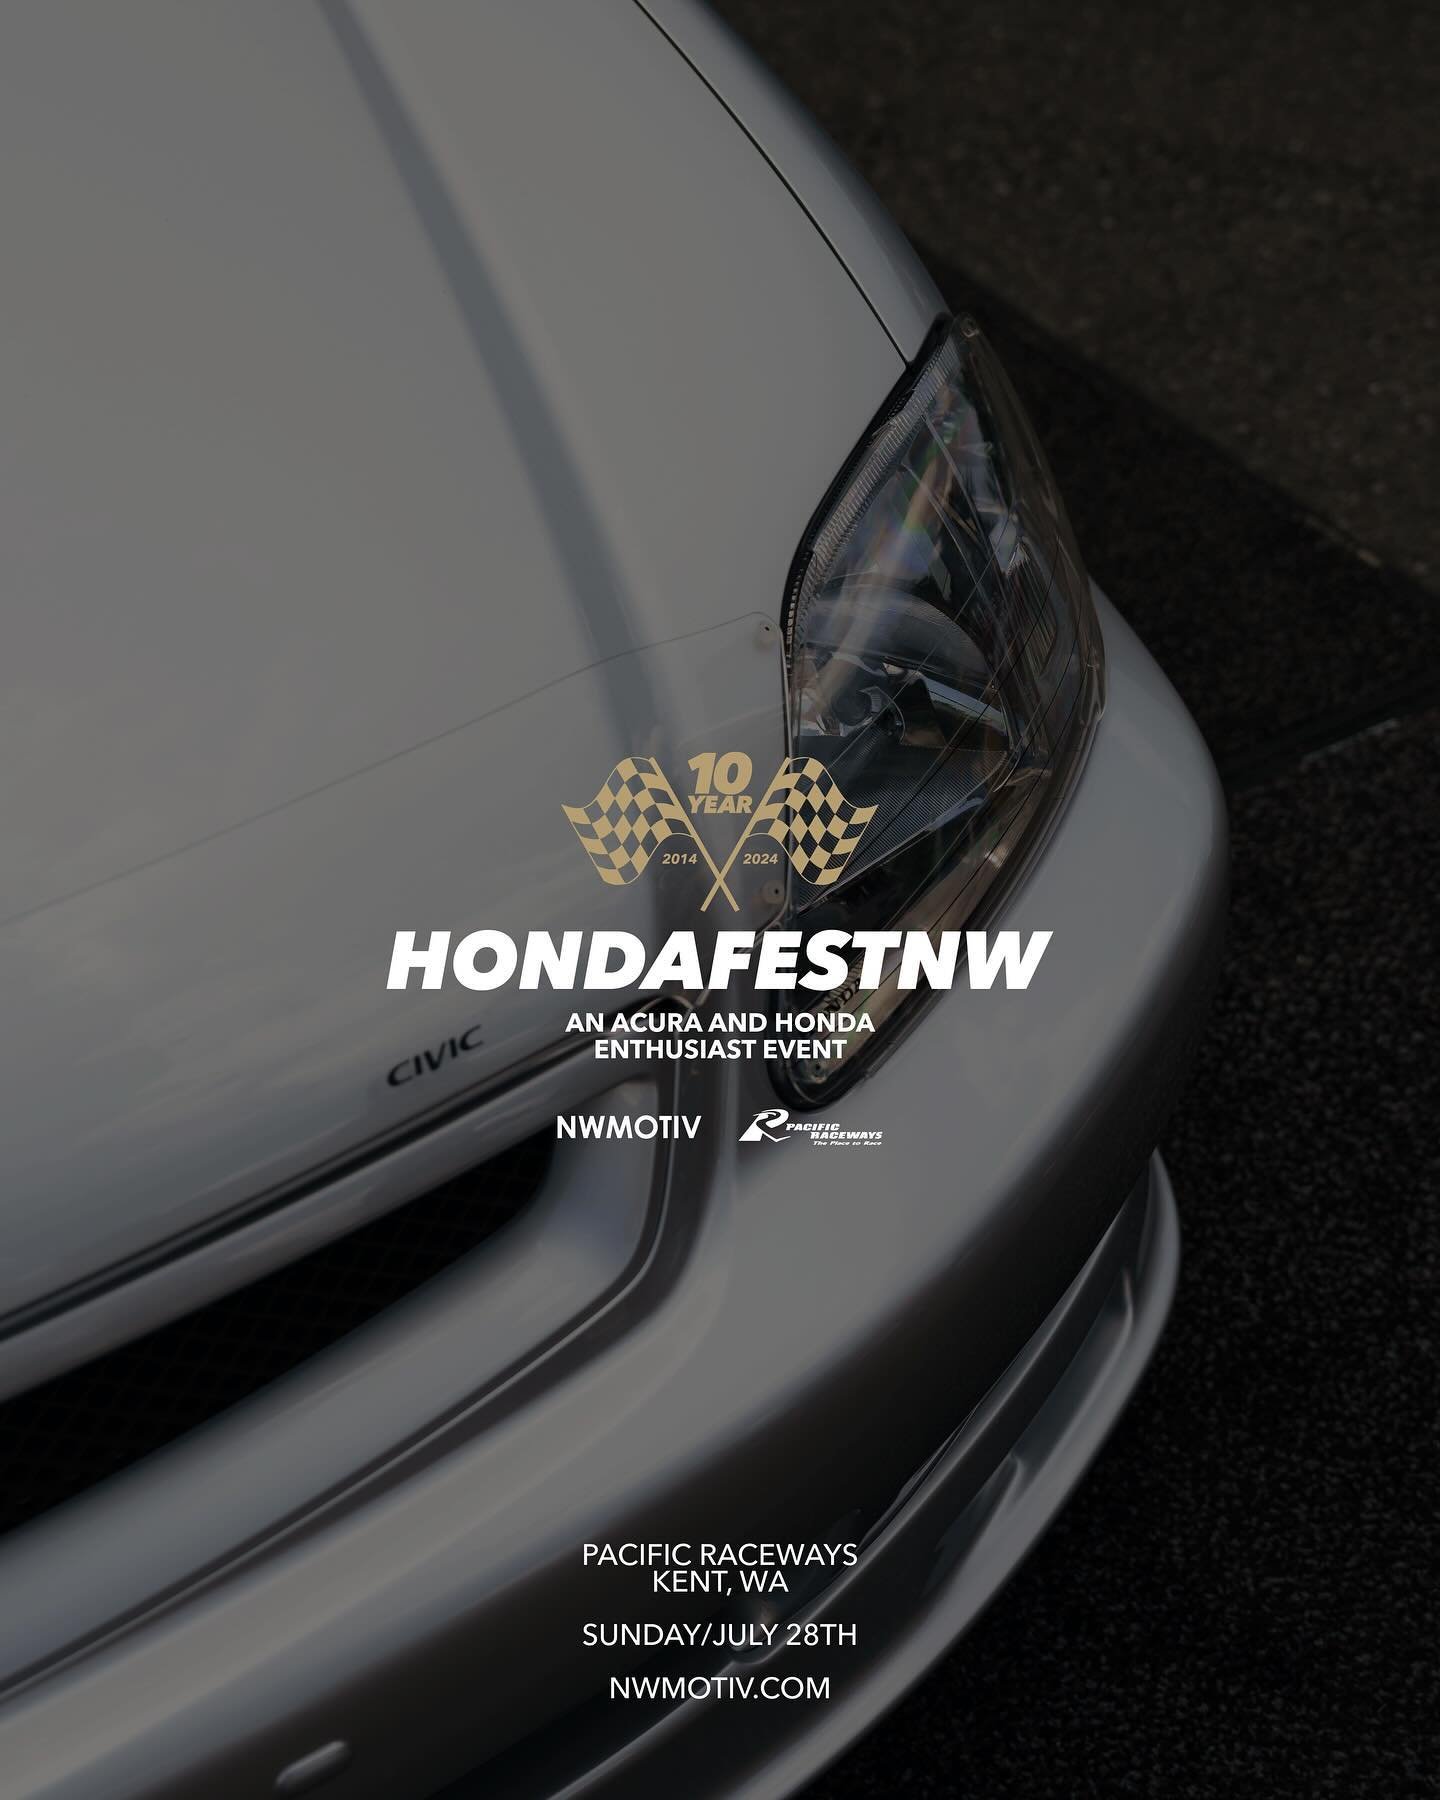 @hondafestnw returns for its 10 year anniversary. Join us on July 28th as we celebrate this milestone!

Make sure you RSVP on our FB event page! Click the link in our bio. 

More information to come.